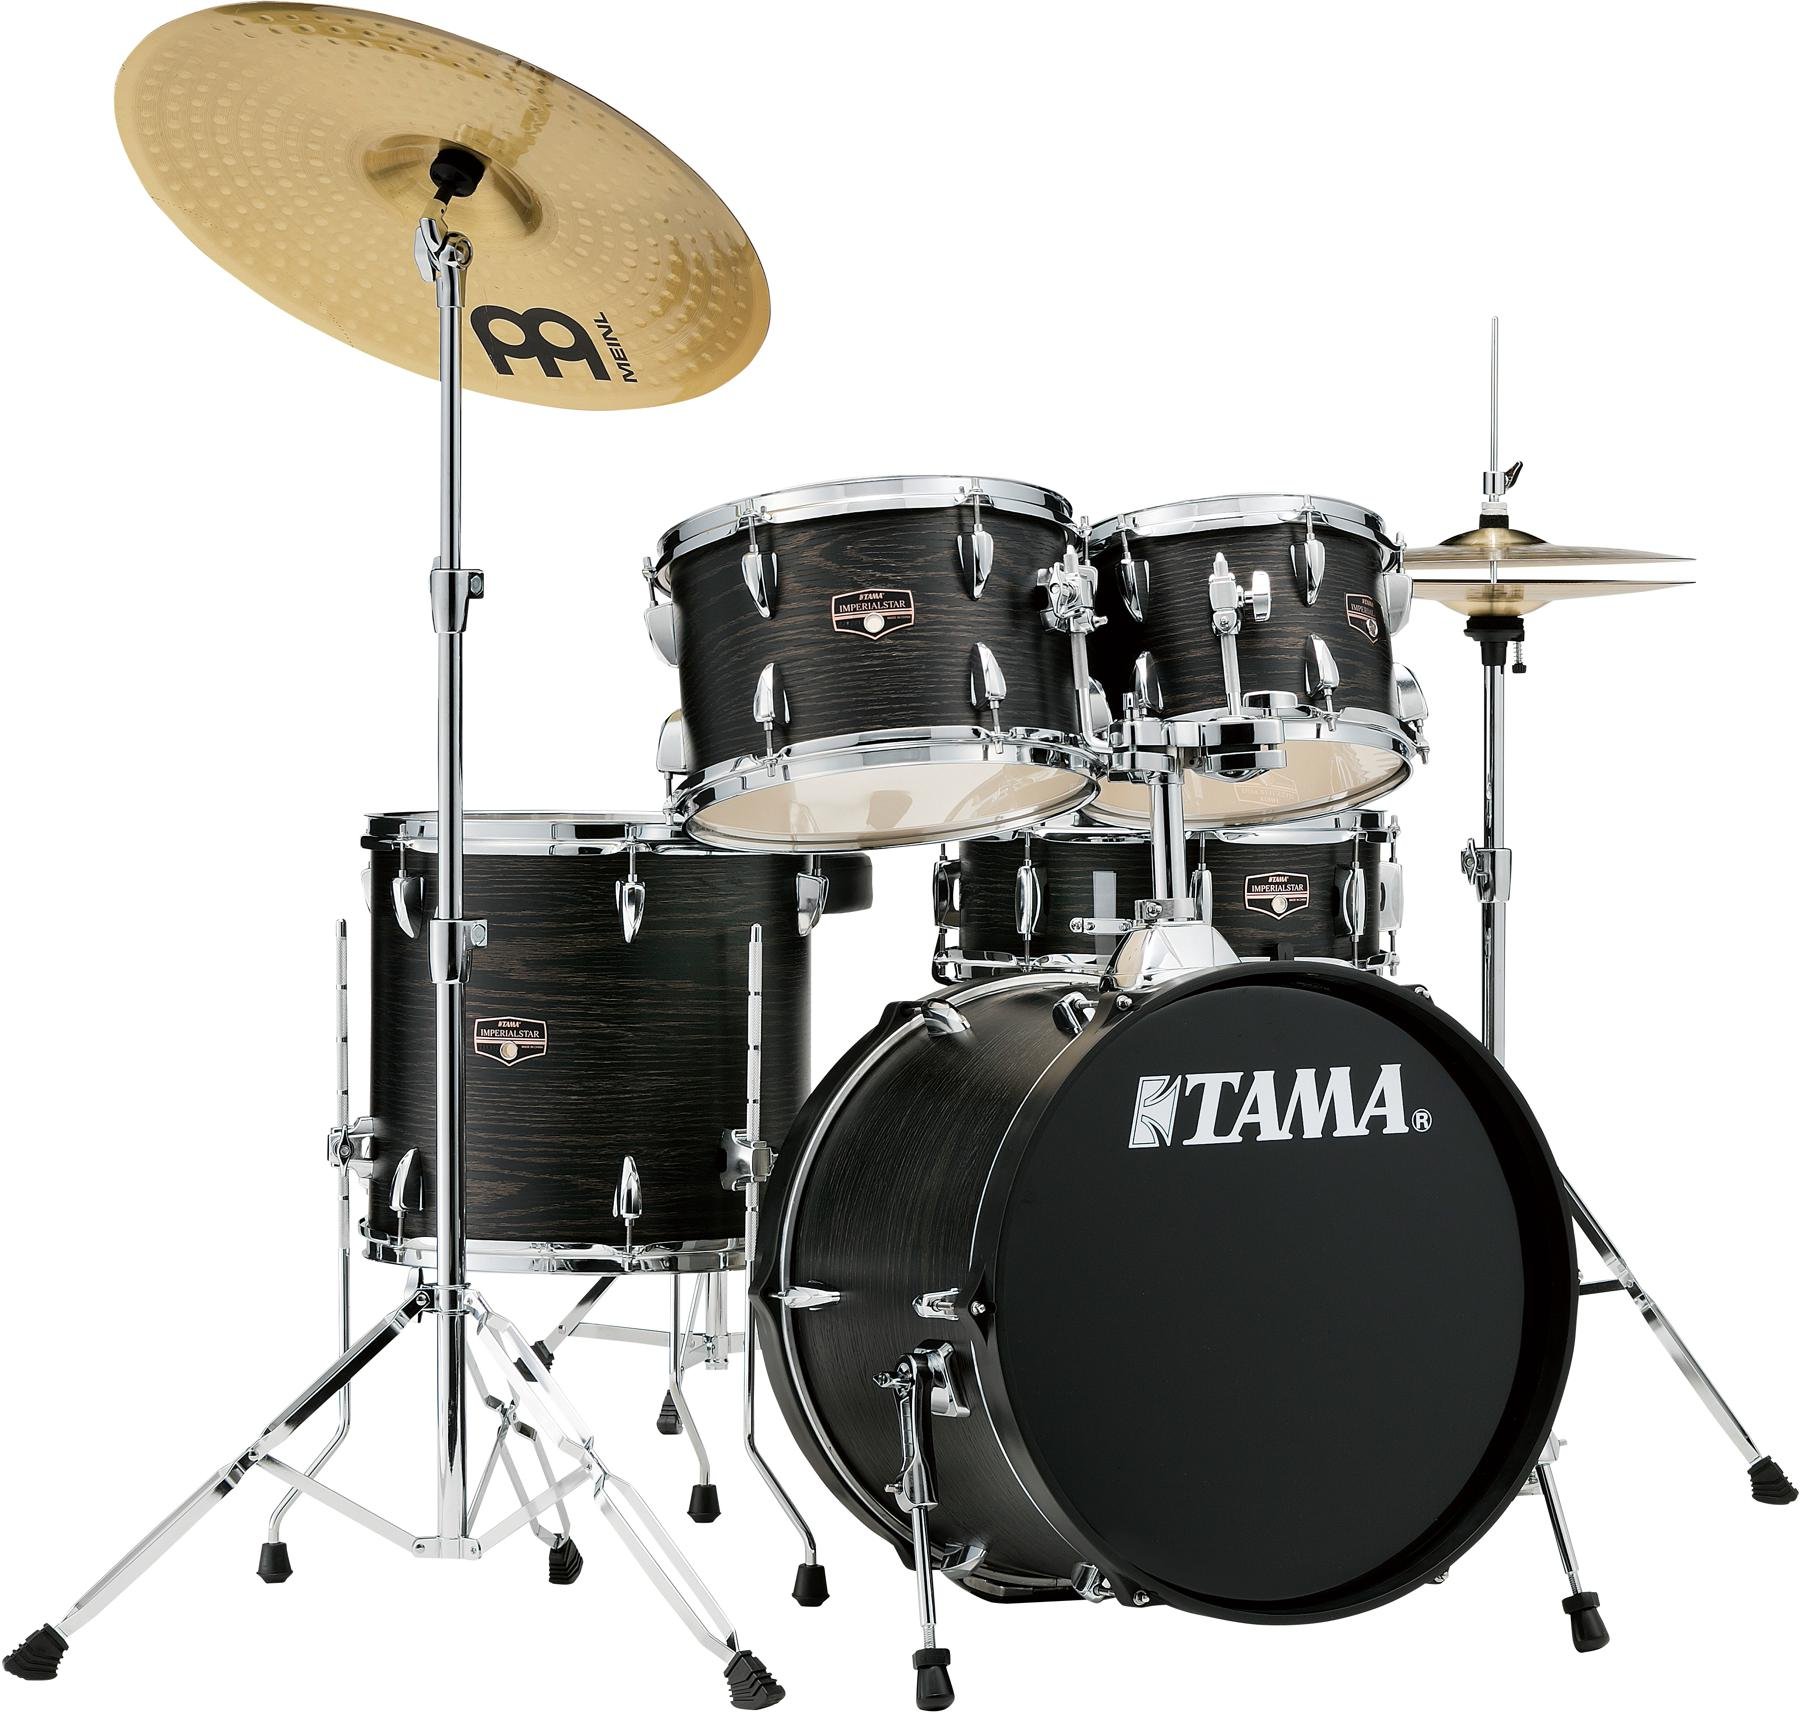 Tama Imperialstar IE62C 6-piece Complete Drum Set with Snare Drum and Meinl Cymbals Blacked Out Black